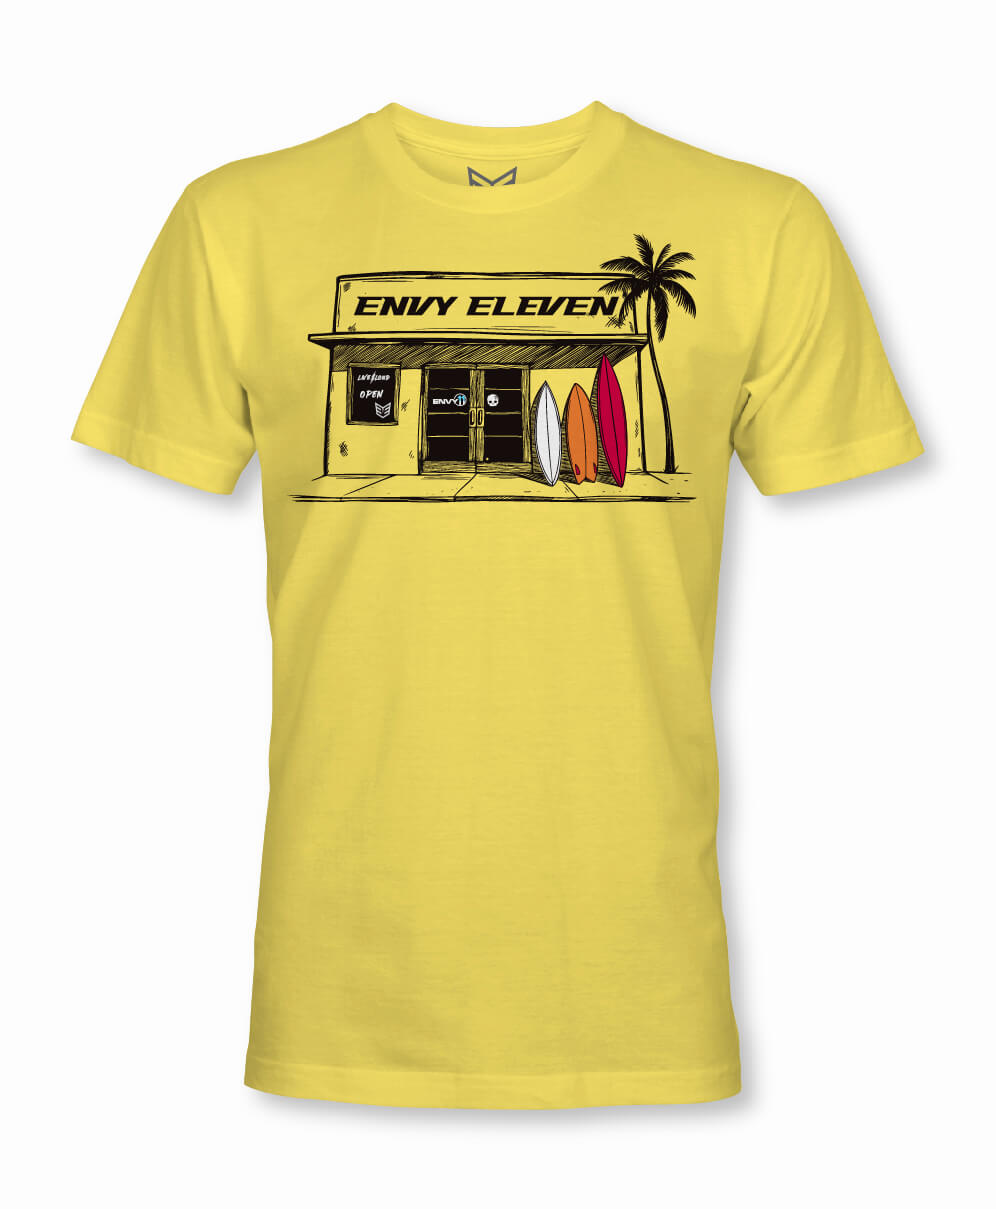 ENVY ELEVEN SURF SHOP TEE - YELLOW